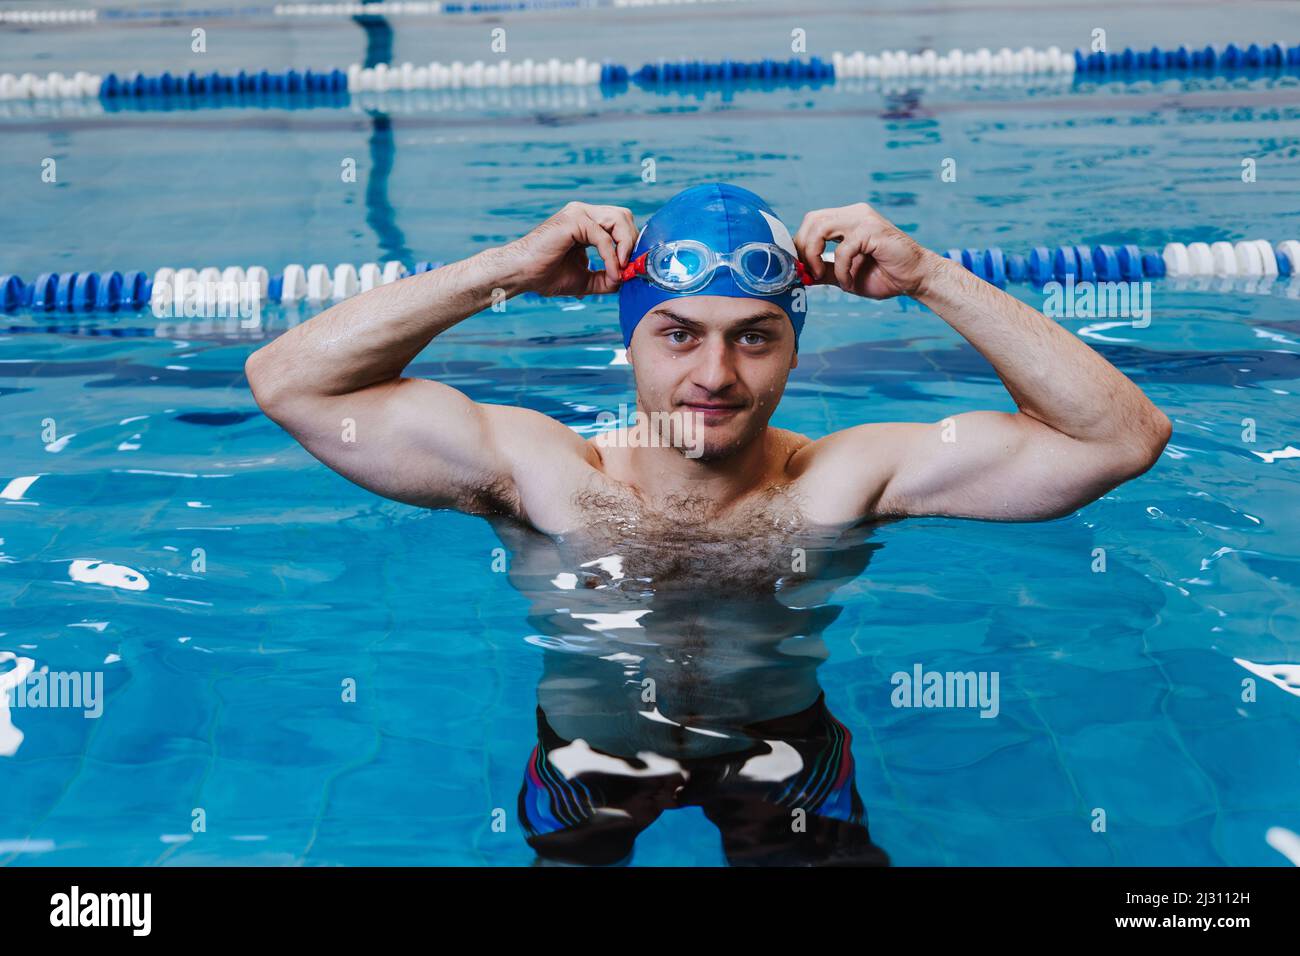 hispanic young man swimmer athlete wearing cap in a swimming training at the Pool in Mexico Latin America Stock Photo